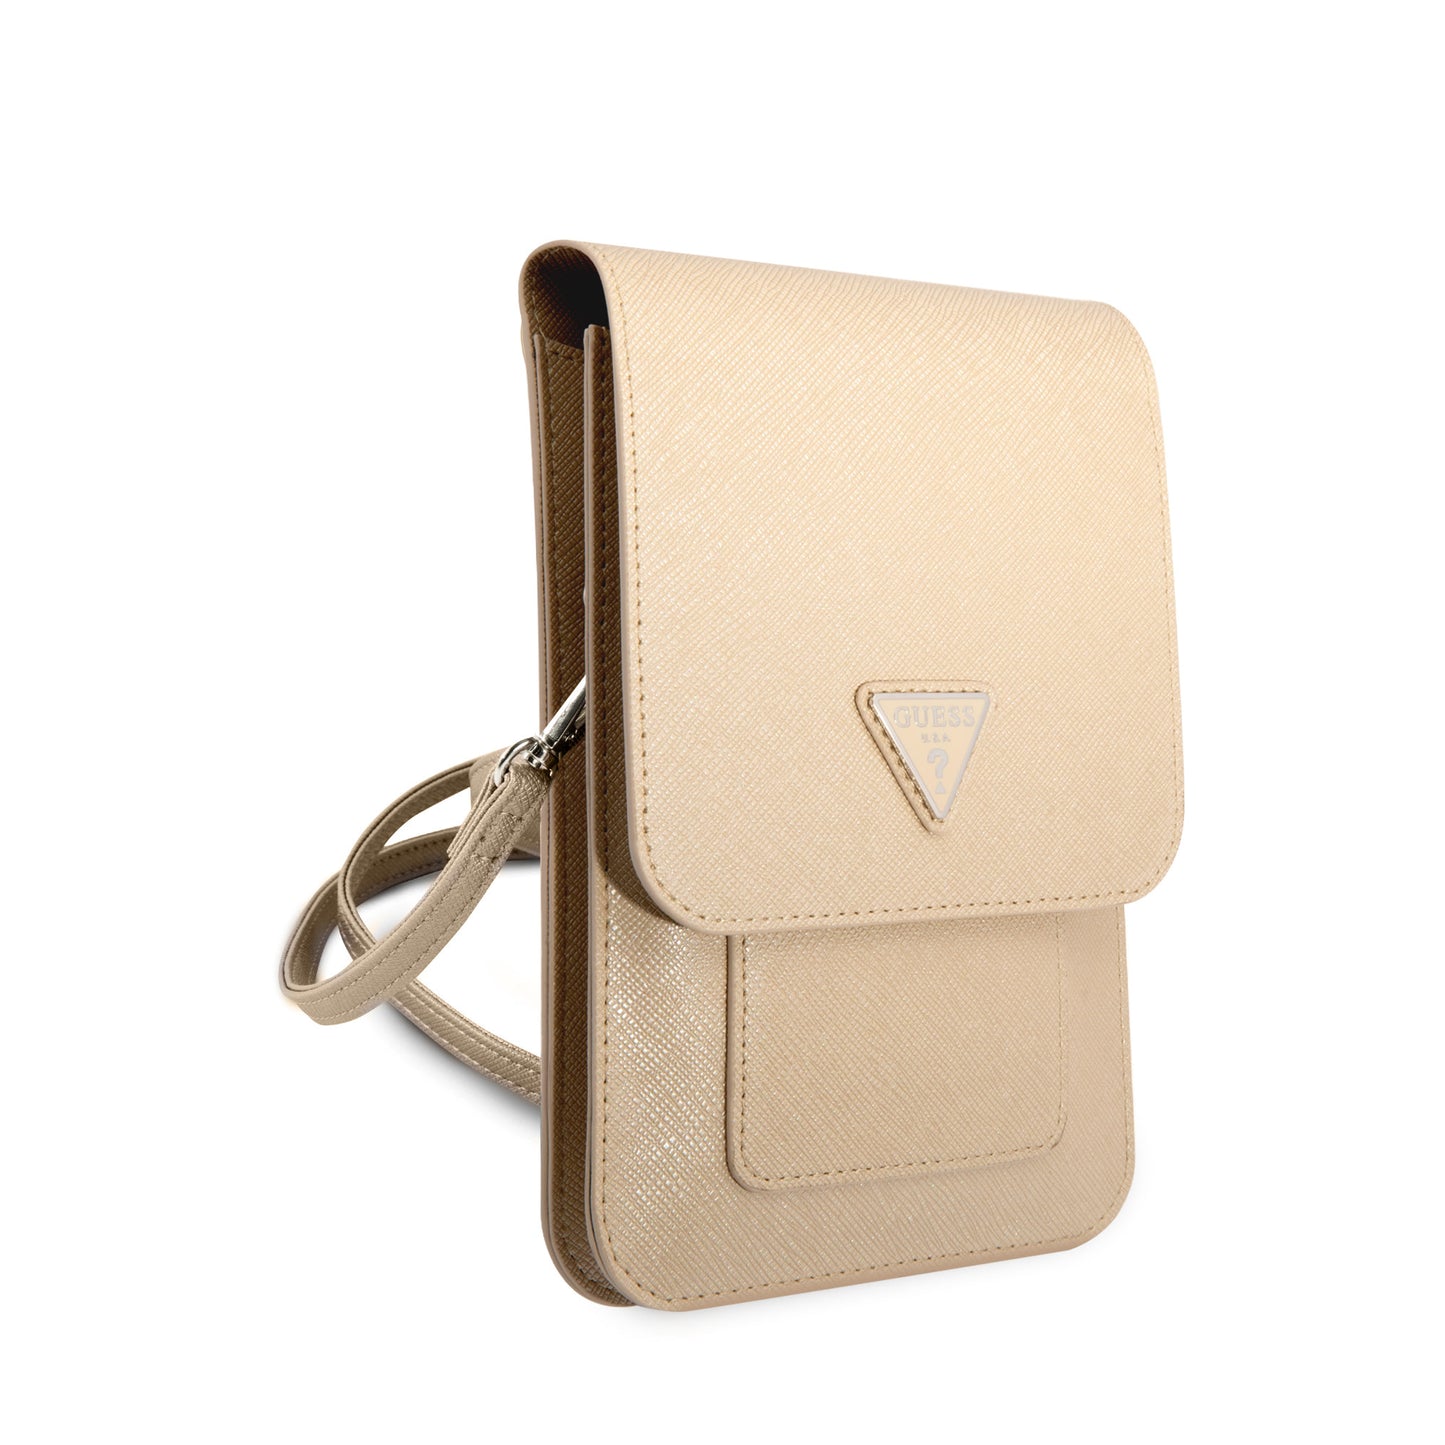 Guess 7 inch PU Leather Heuptas - Wallet bag - 4G Logo - Beige - Triangle